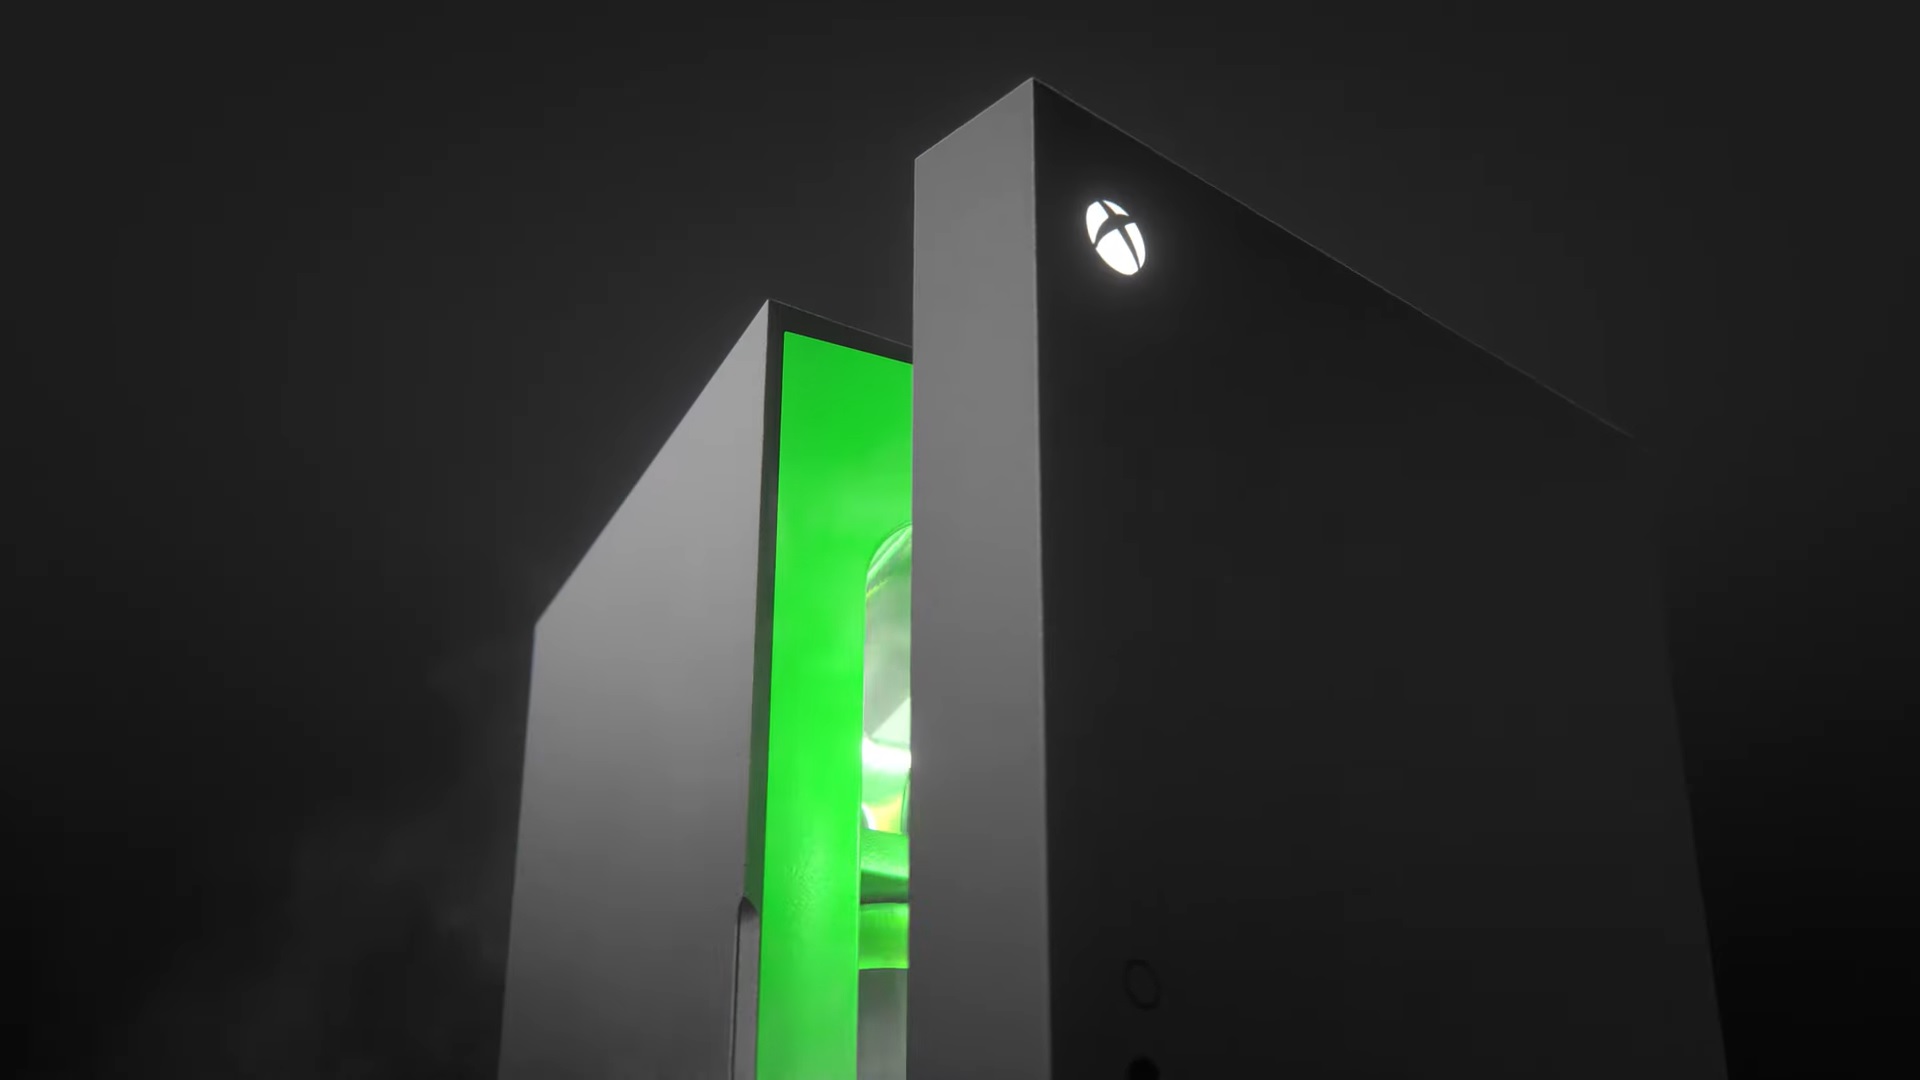 Microsoft's Xbox mini-fridges will be widely available this year